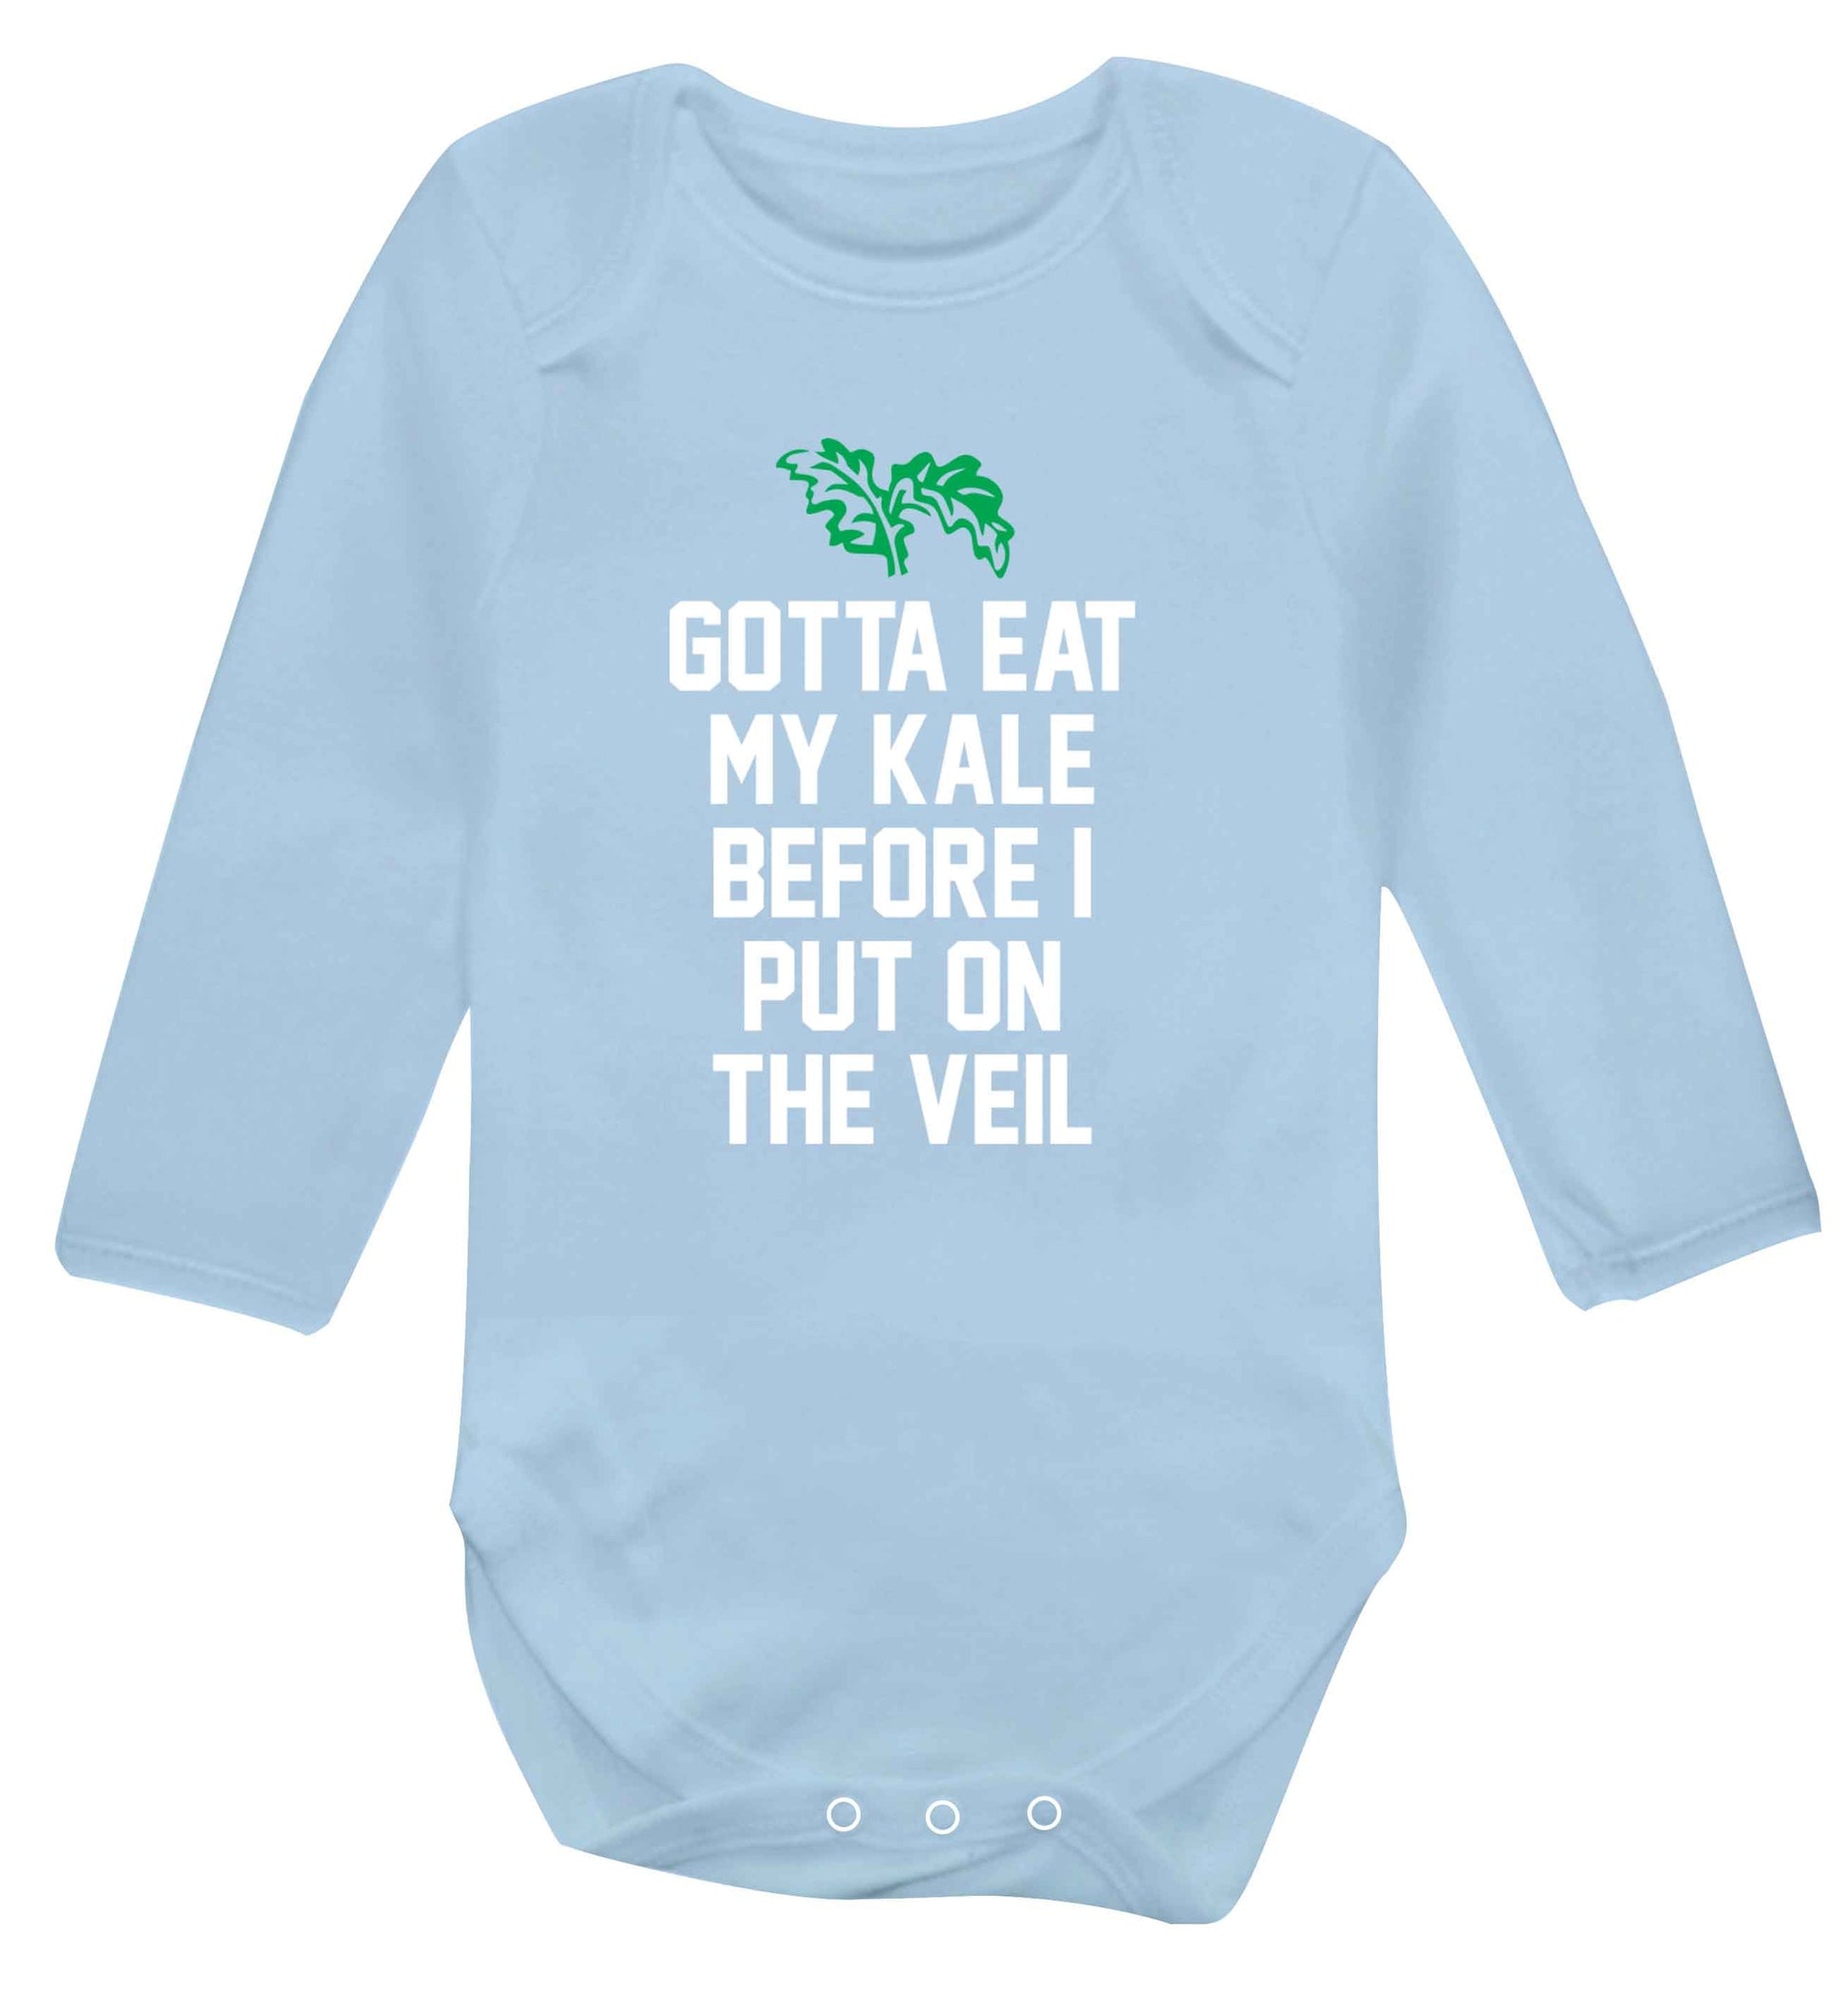 Gotta eat my kale before I put on the veil Baby Vest long sleeved pale blue 6-12 months